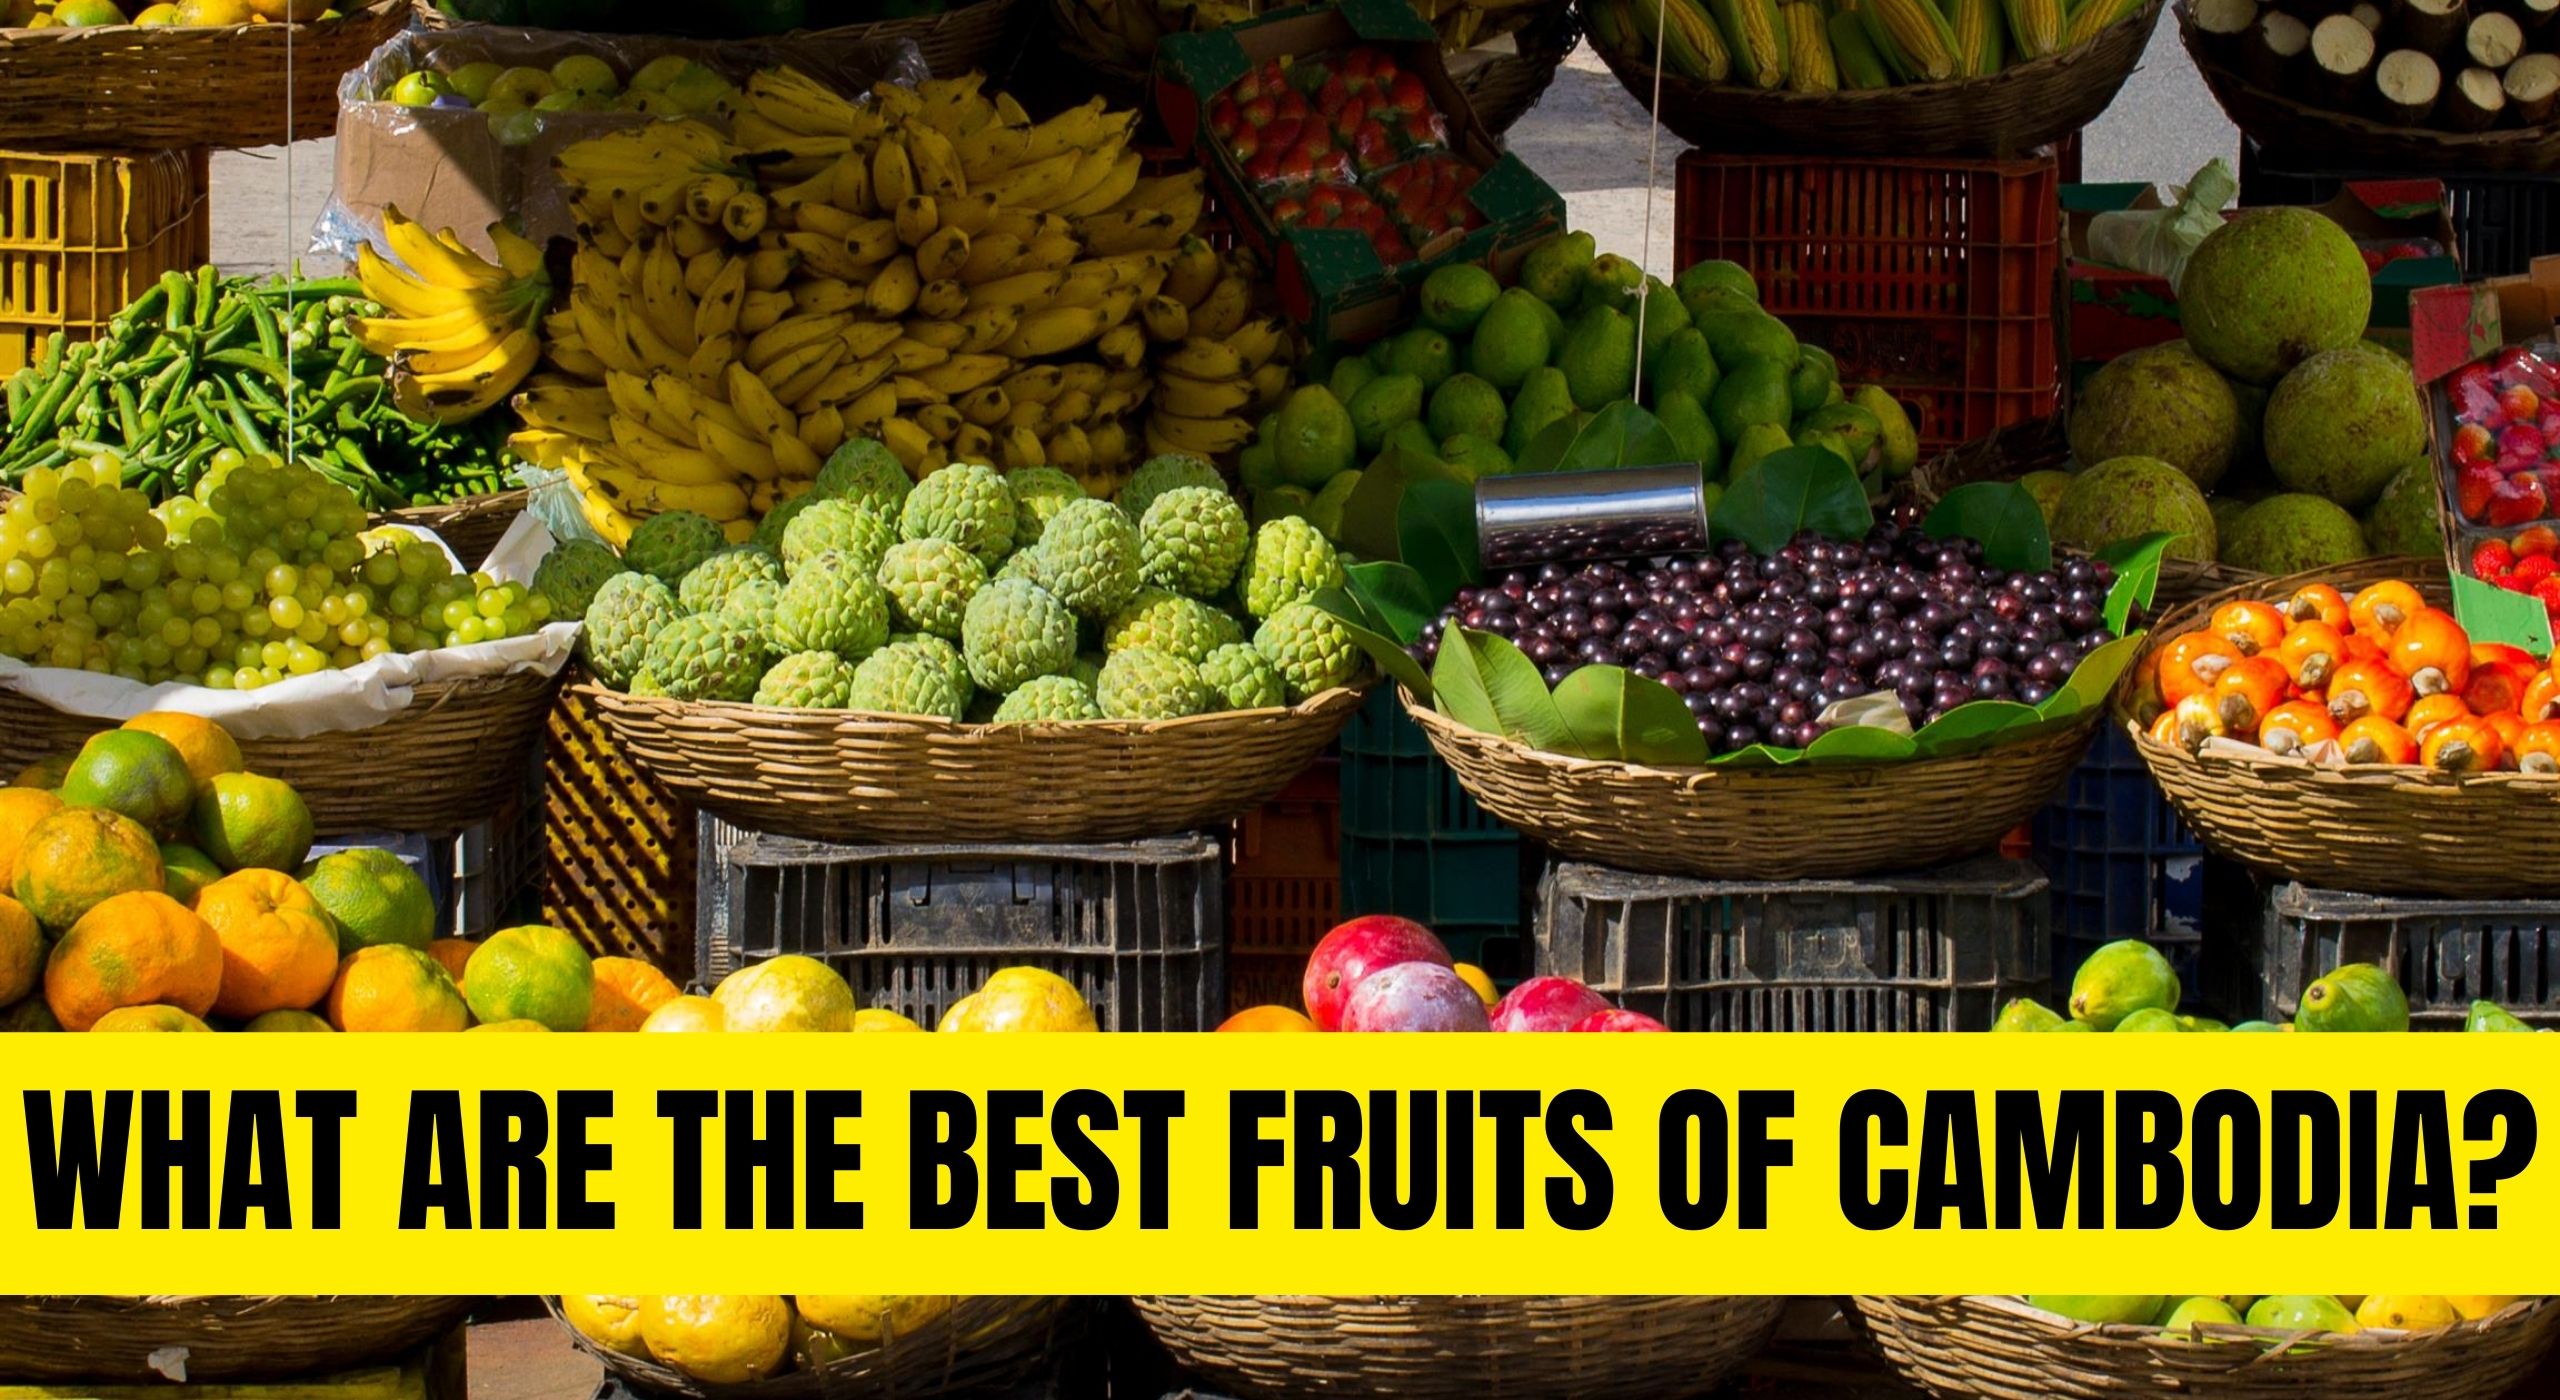 What Are The Best Fruits of Cambodia?